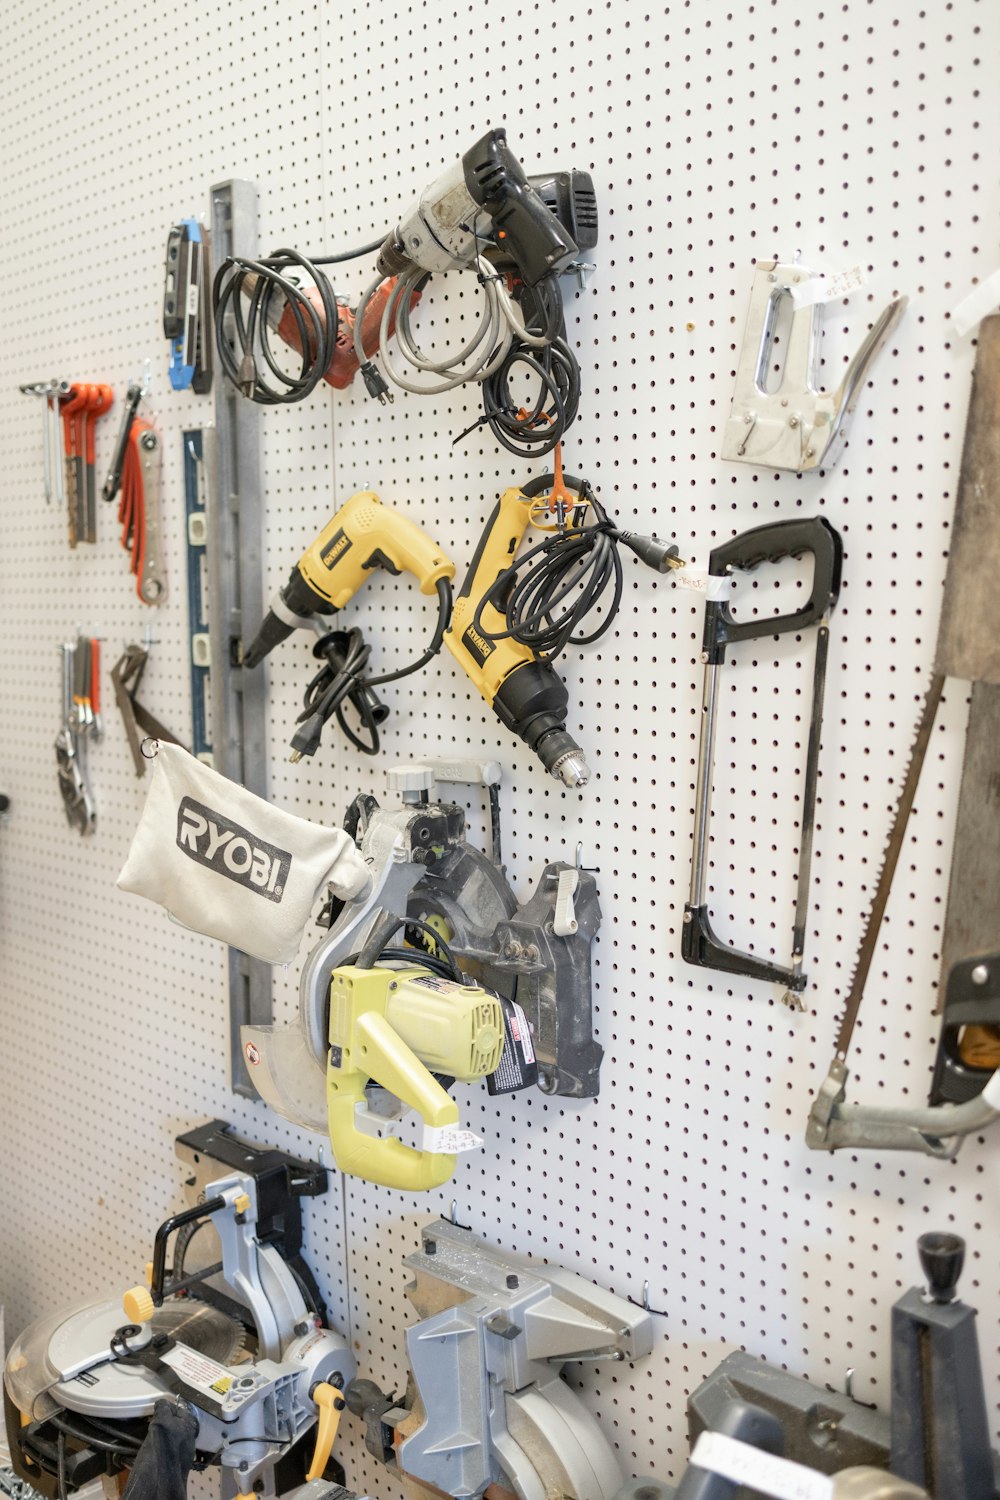 a work area with tools and tools hanging on the wall